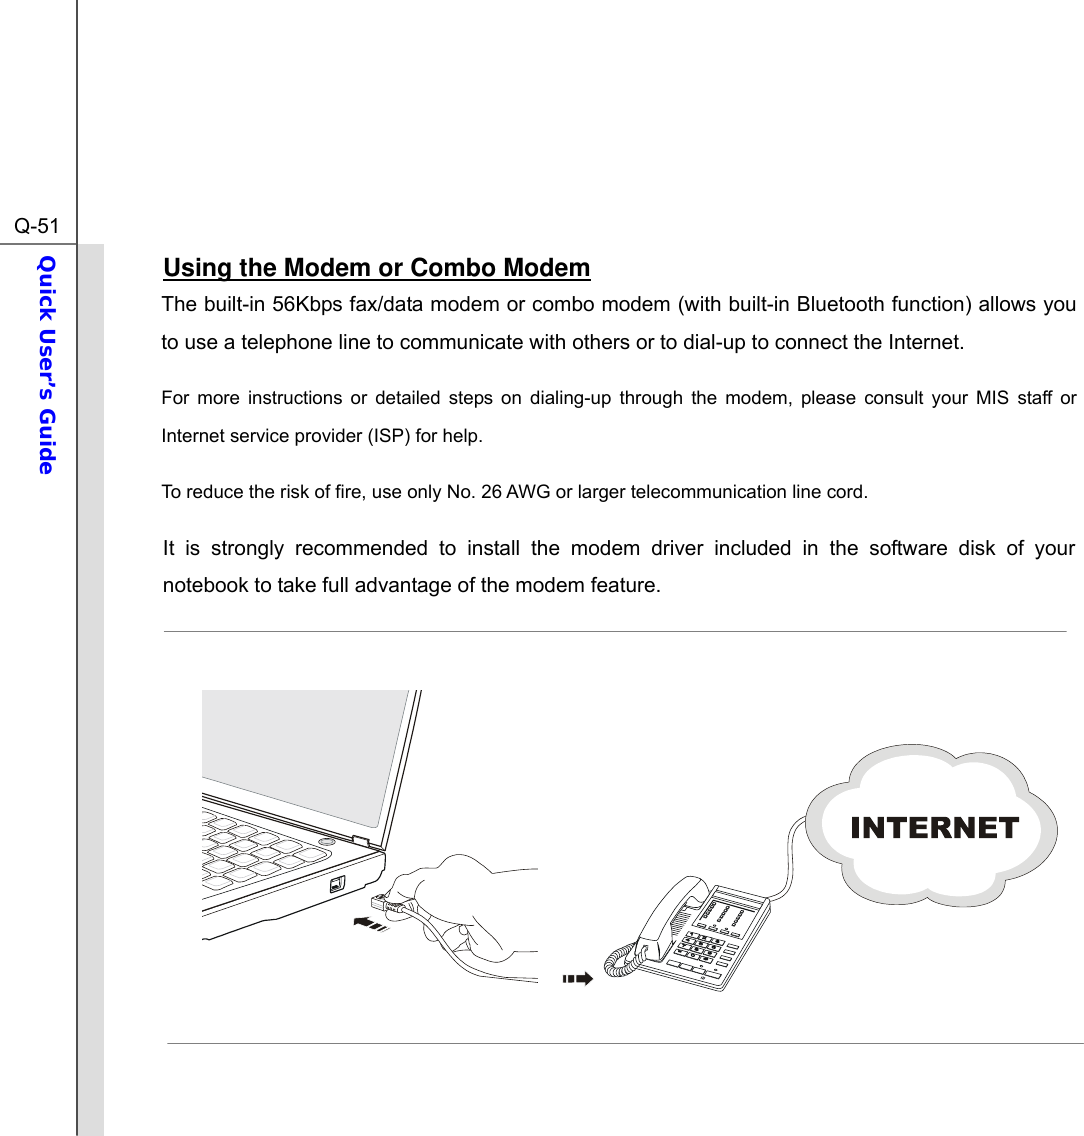  Q-51Quick User’s Guide  Using the Modem or Combo Modem The built-in 56Kbps fax/data modem or combo modem (with built-in Bluetooth function) allows you to use a telephone line to communicate with others or to dial-up to connect the Internet. For more instructions or detailed steps on dialing-up through the modem, please consult your MIS staff or Internet service provider (ISP) for help. To reduce the risk of fire, use only No. 26 AWG or larger telecommunication line cord. It is strongly recommended to install the modem driver included in the software disk of your notebook to take full advantage of the modem feature.          